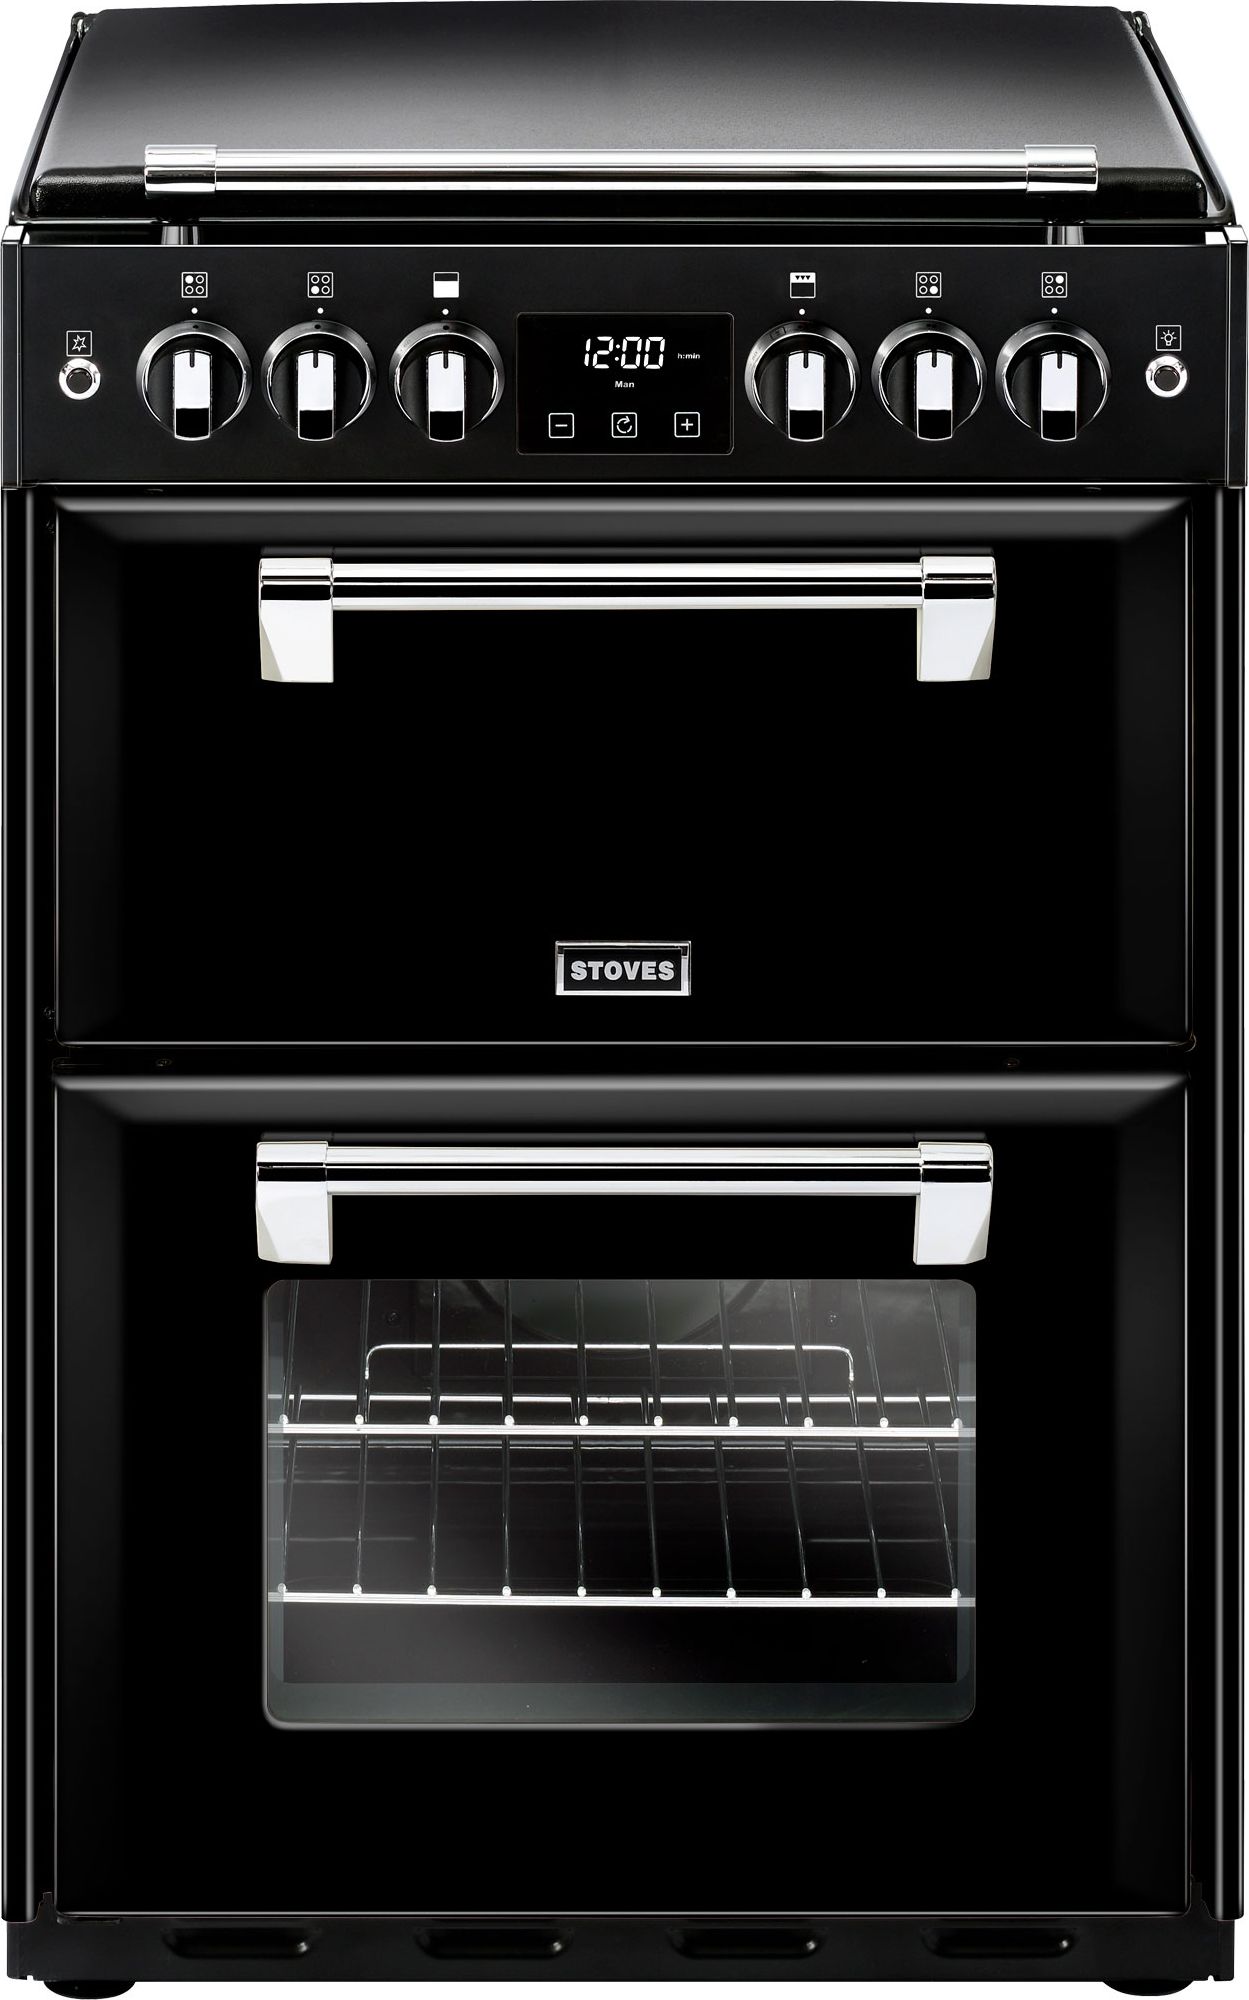 Stoves Richmond600G 60cm Freestanding Gas Cooker with Full Width Electric Grill - Black - A+/A Rated, Black